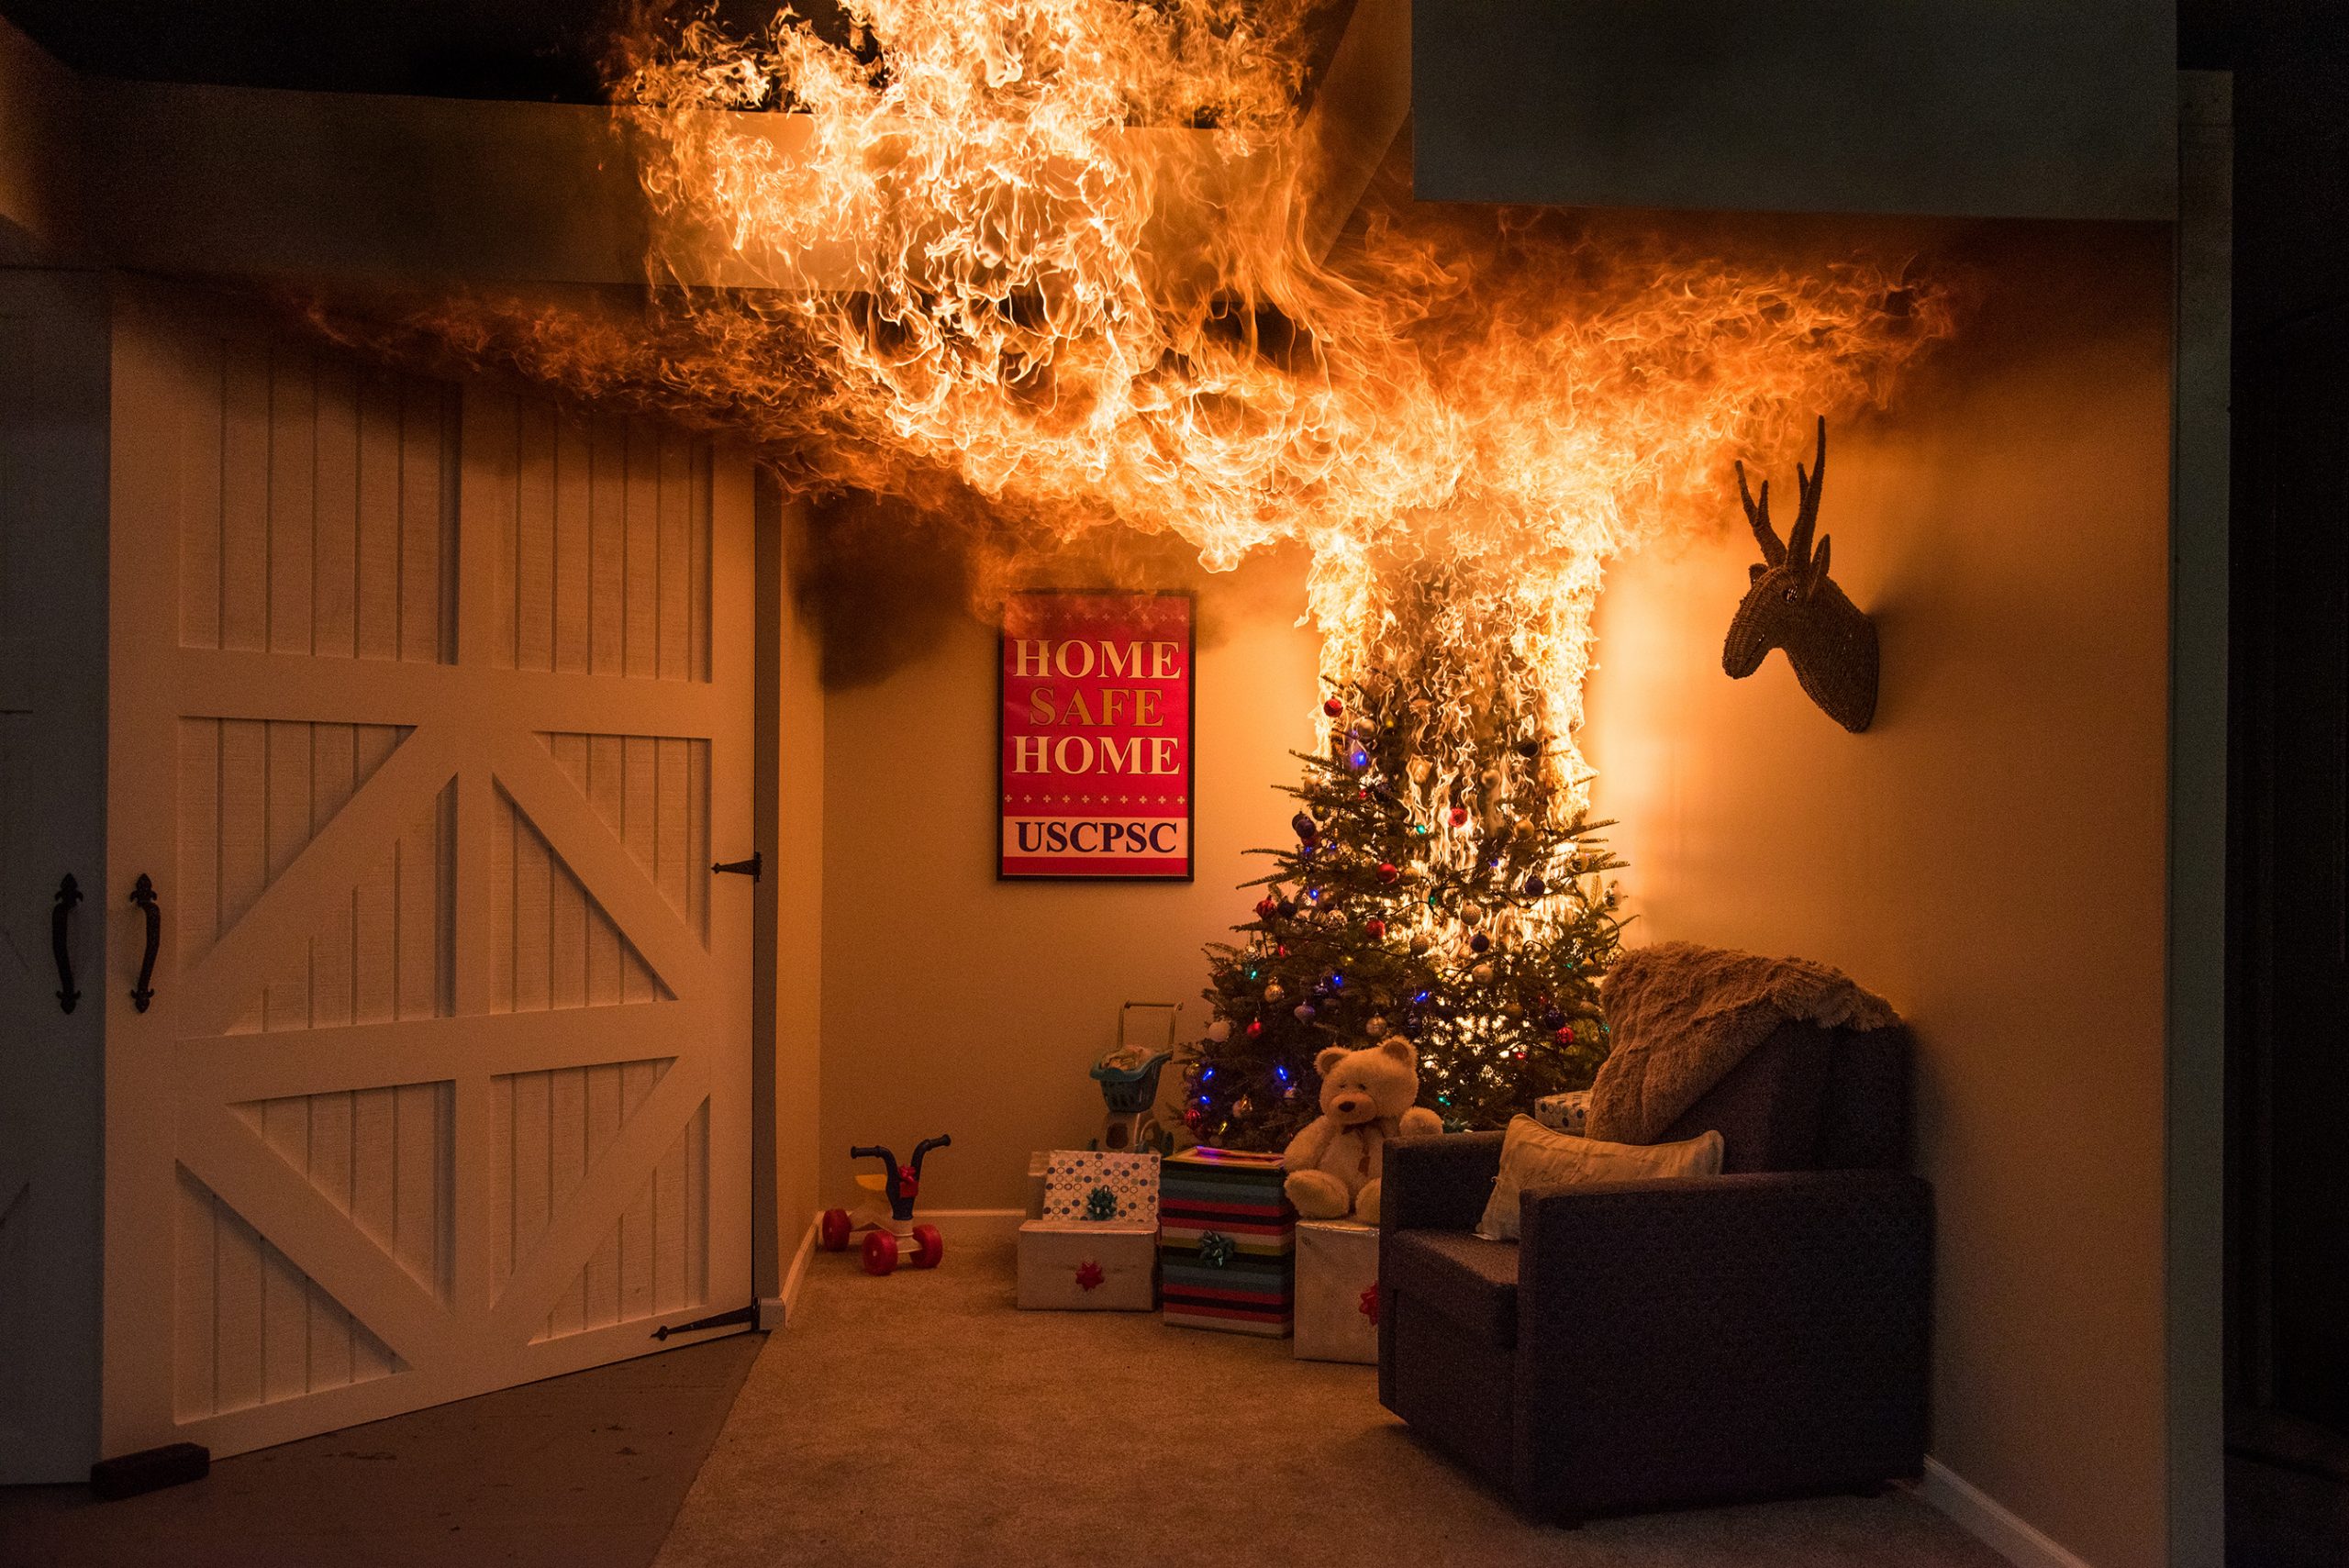 Fire prevention tips for your home/business during the Christmas season